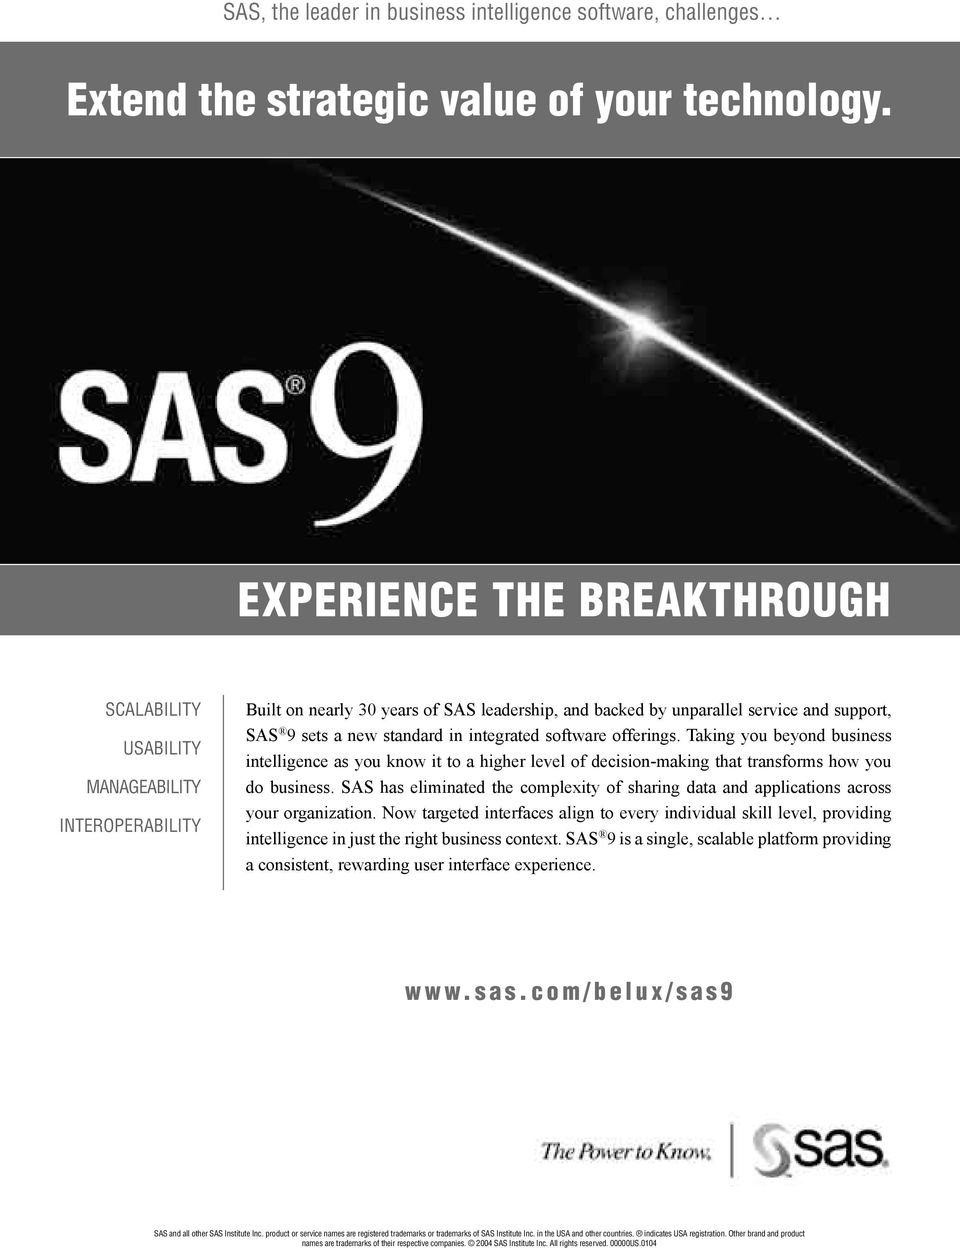 SAS has eliminated the complexity of sharing data and applications across your organization.